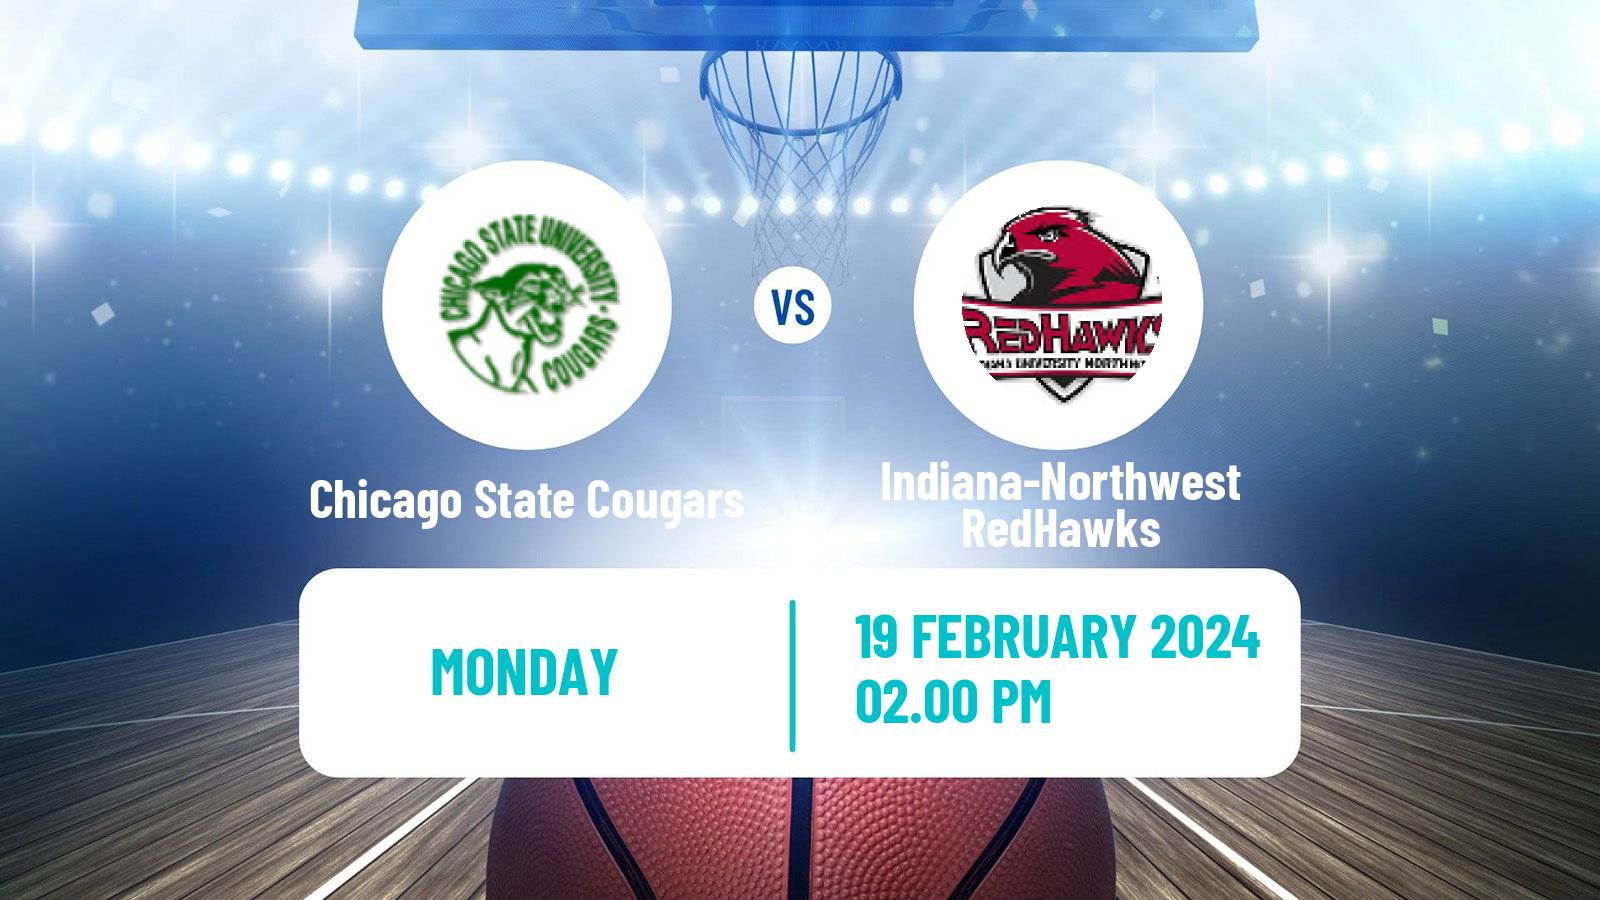 Basketball NCAA College Basketball Chicago State Cougars - Indiana-Northwest RedHawks